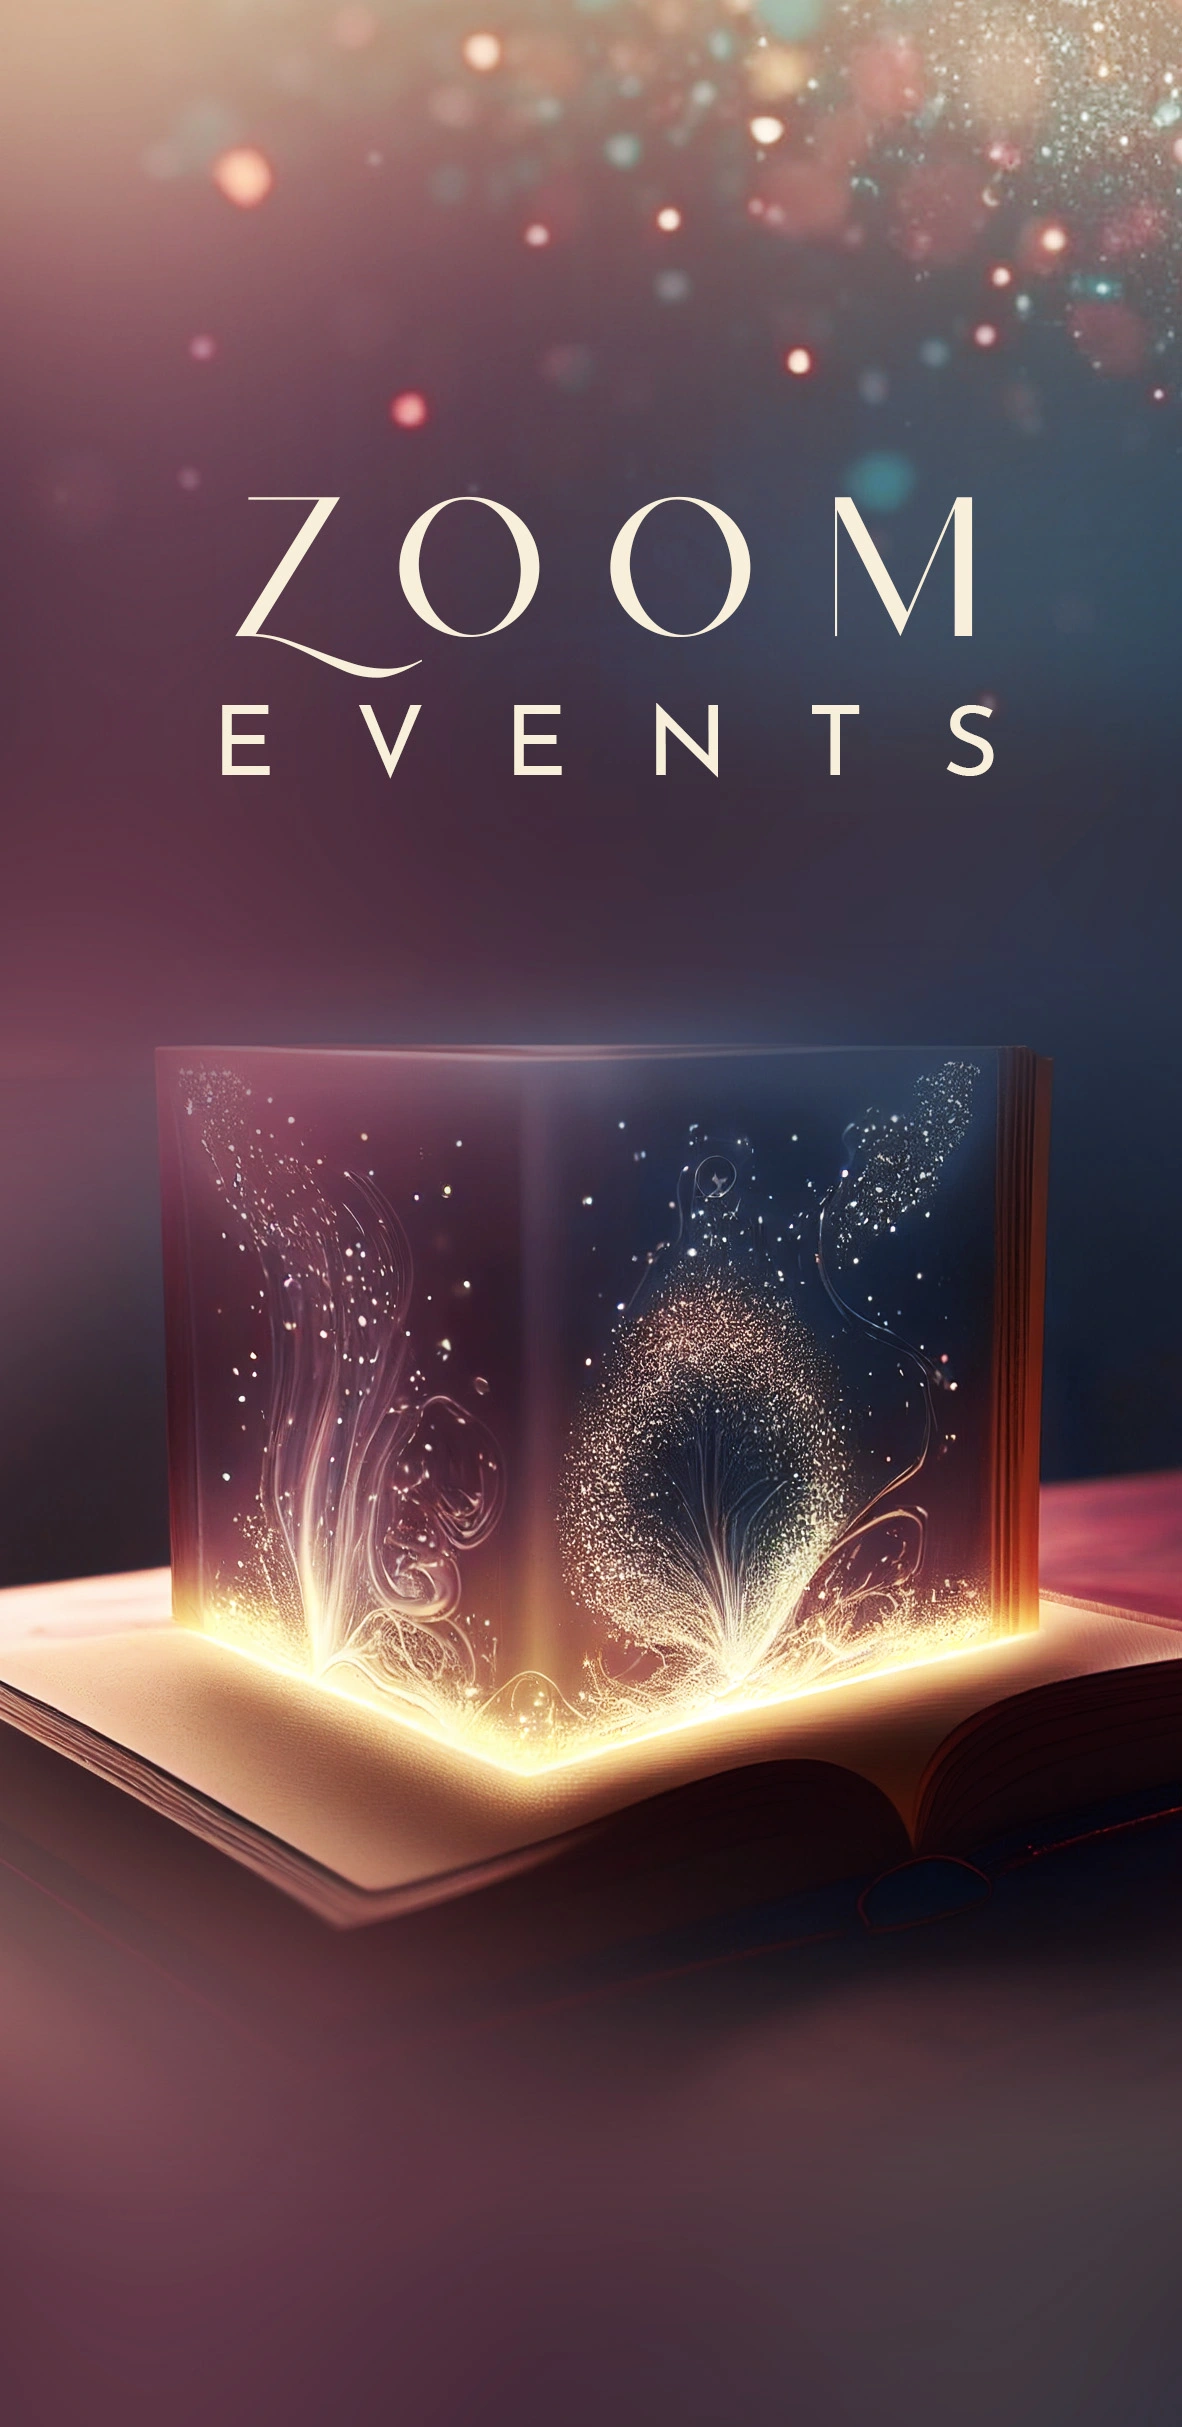 A mystical cube on a book image for Namaste Healing Arts's Zoom Events services section.